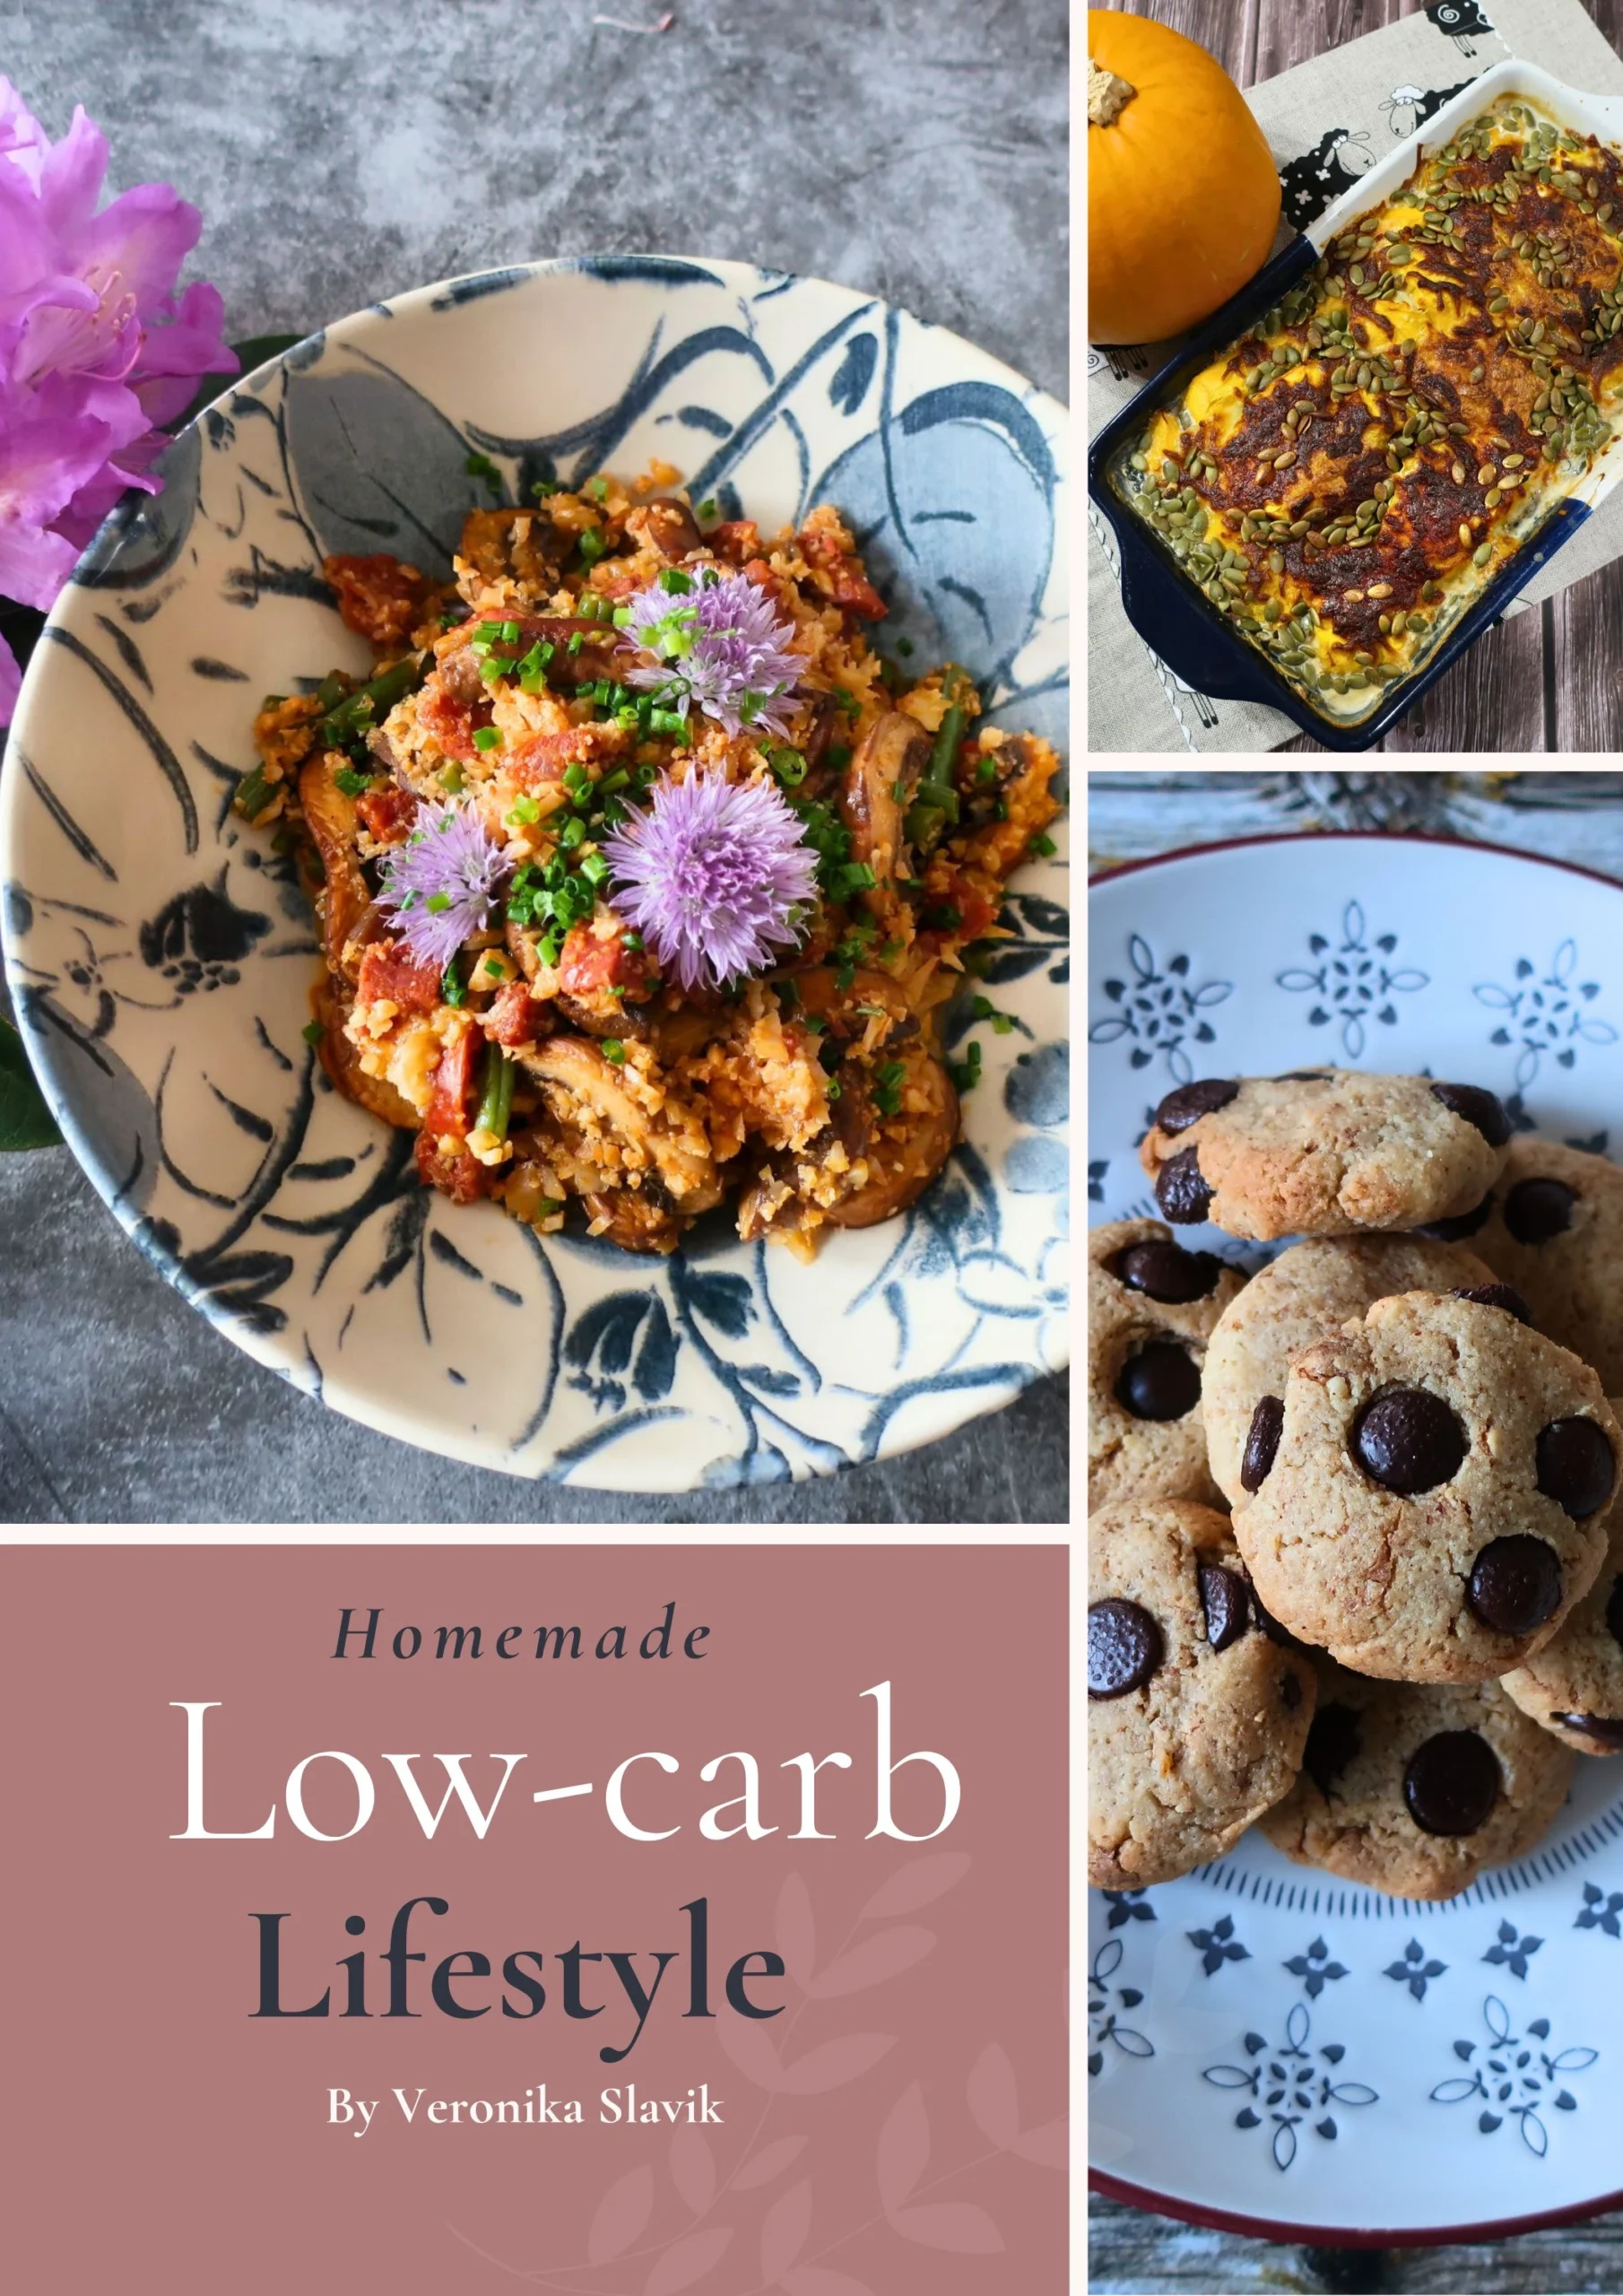 Homemade Low-carb Lifestyle